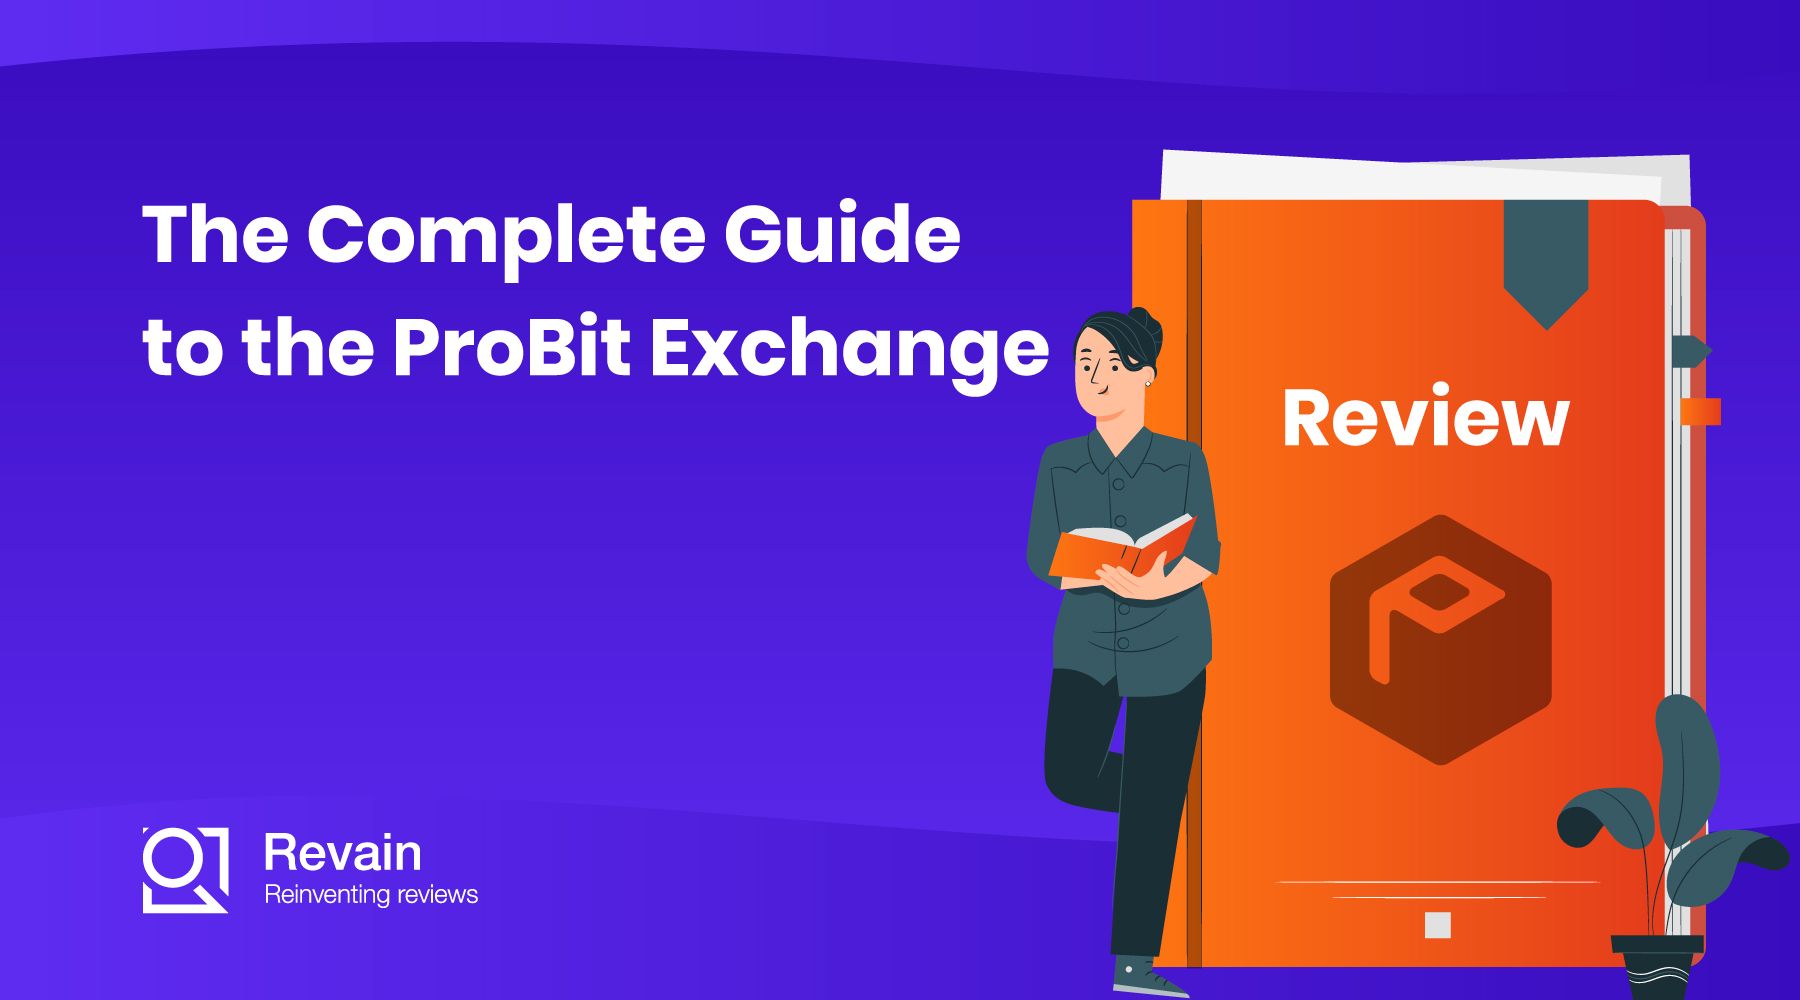 Article The Complete Guide to the ProBit Exchange